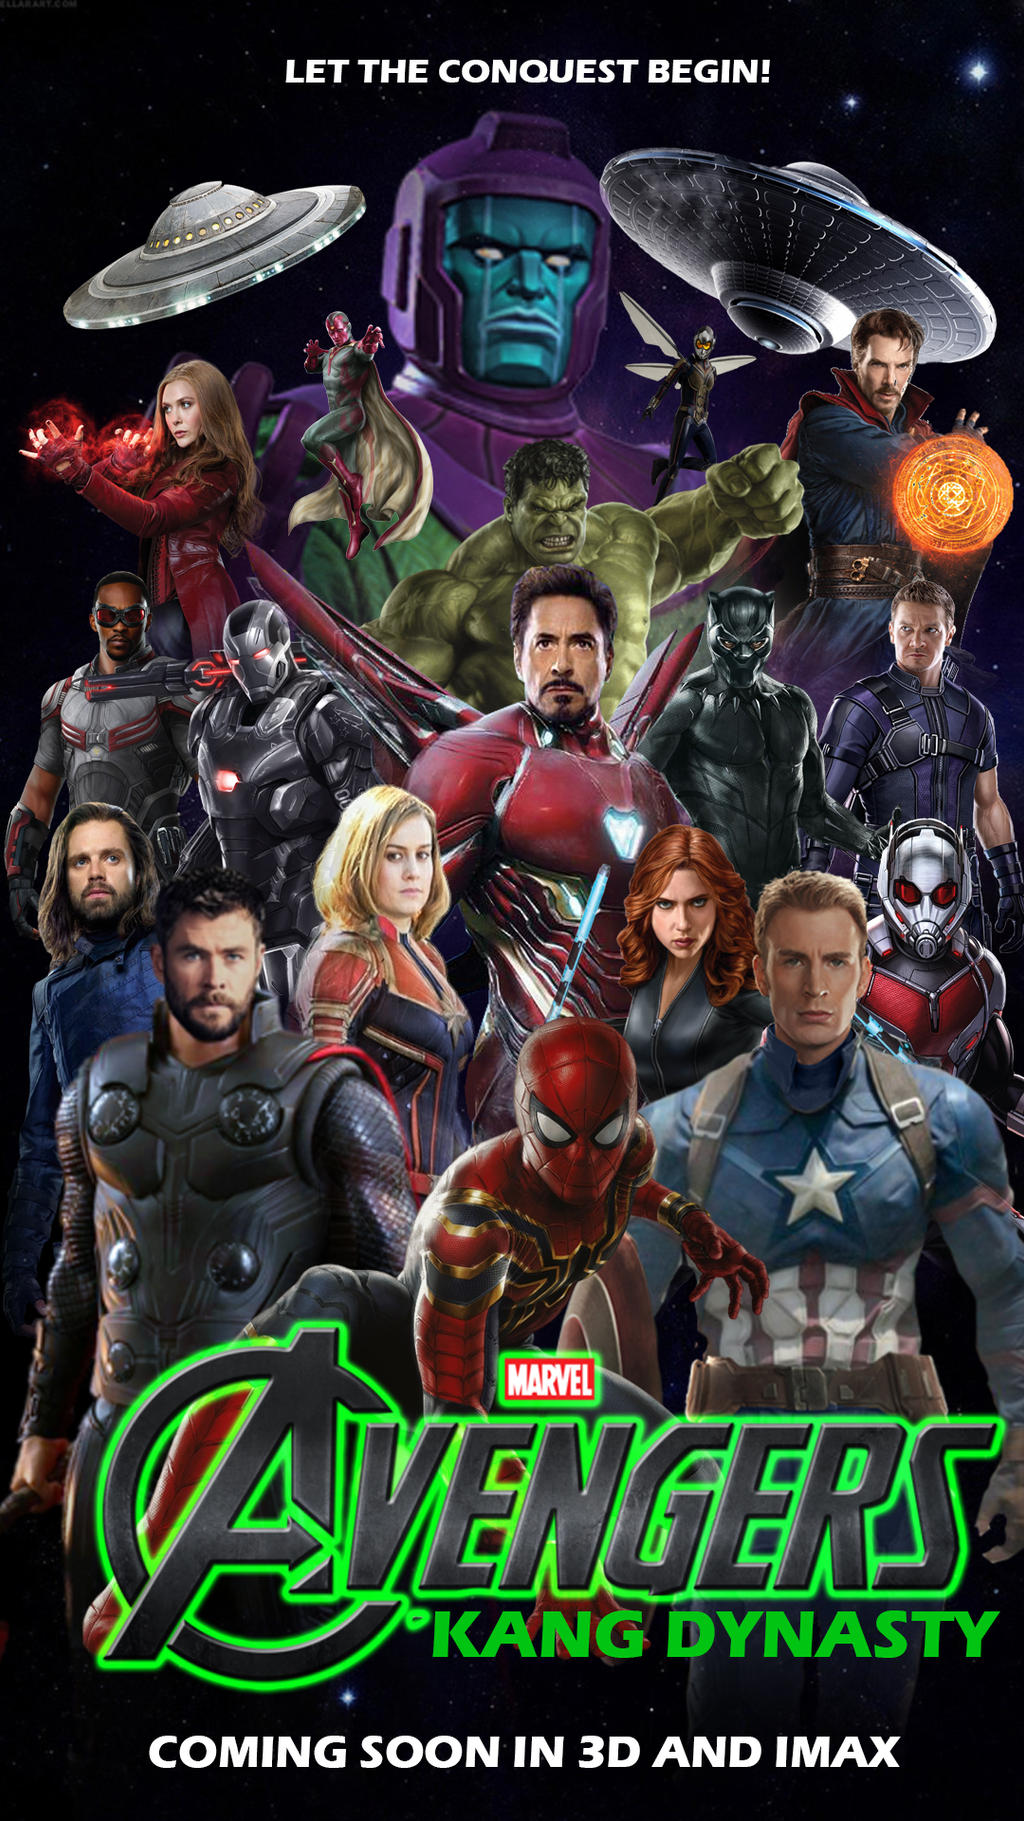 Poster Avengers The Kang Dynasty Part 1 by rivo22245 on DeviantArt